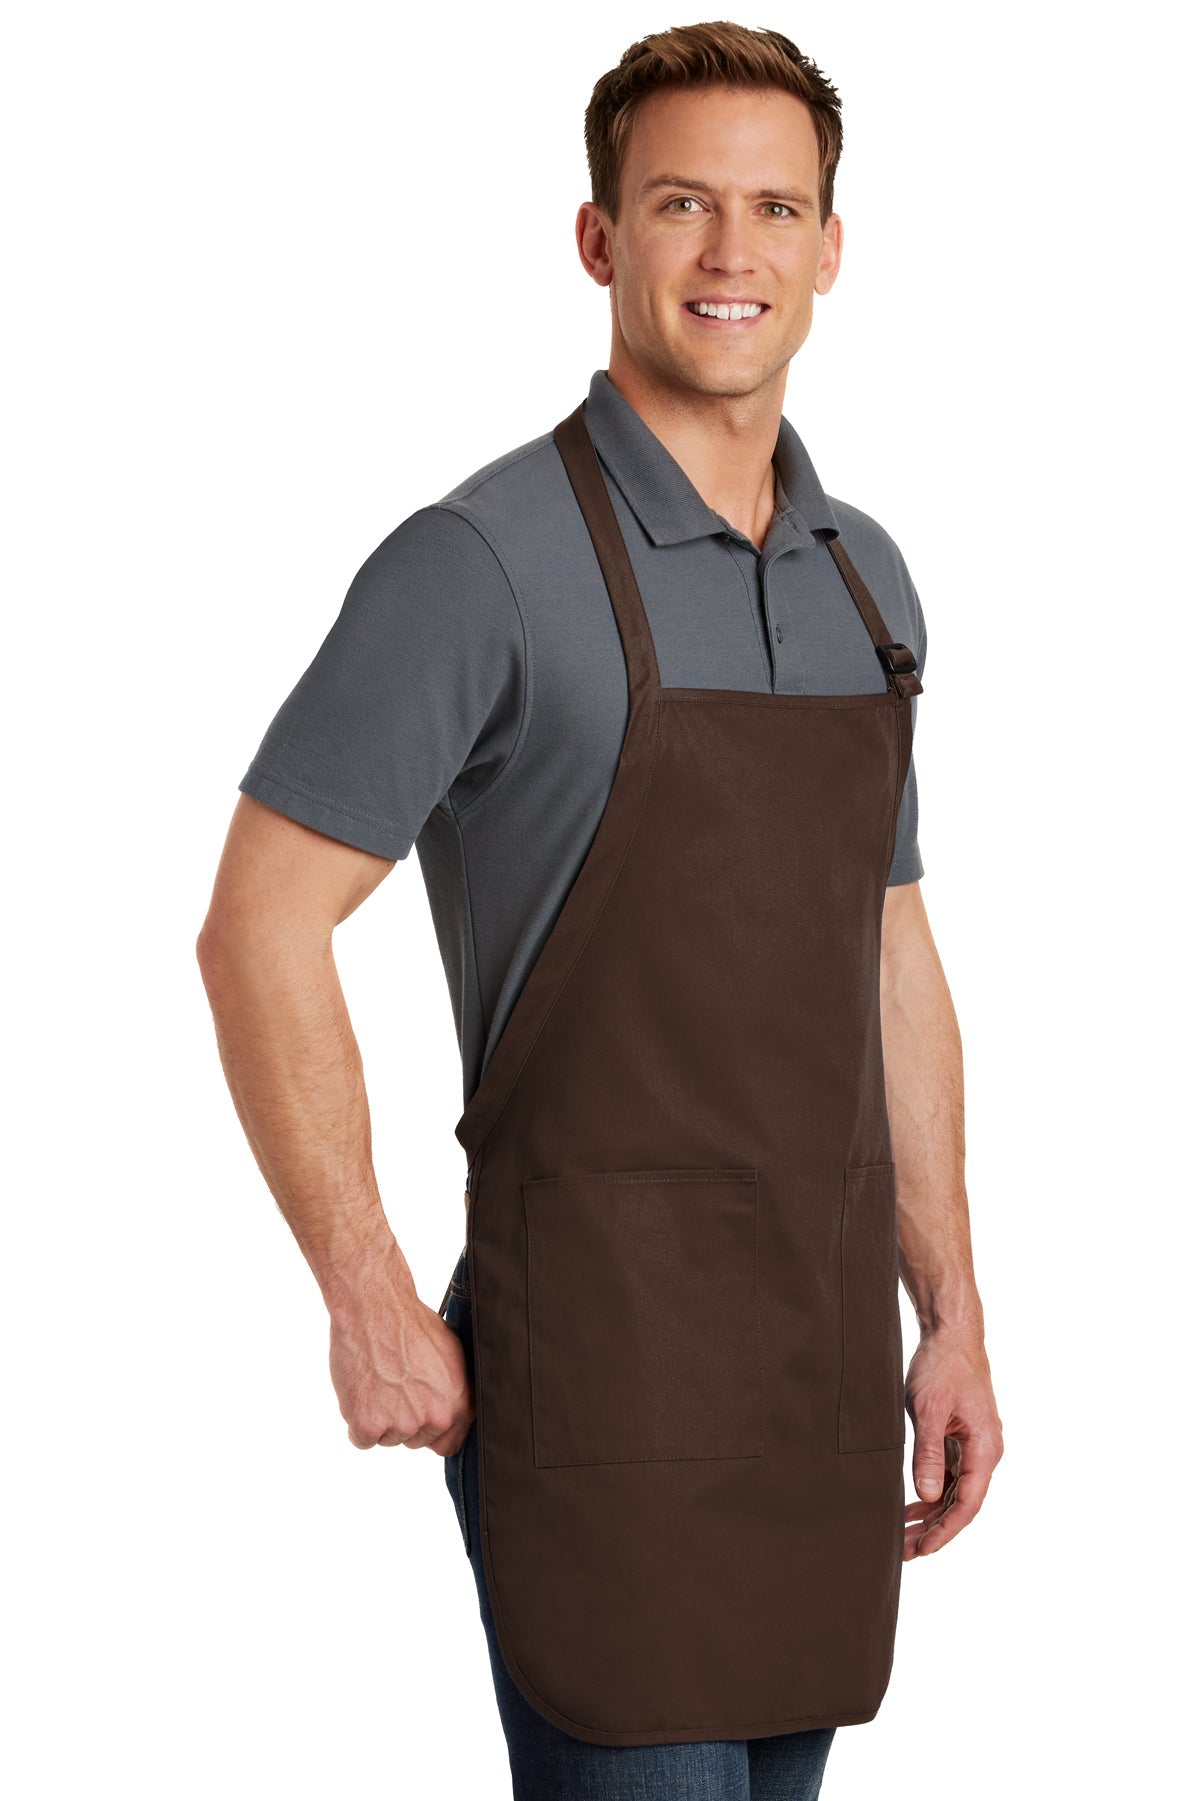 Port Authority Full-Length Custom Aprons with Pockets, Coffee Bean